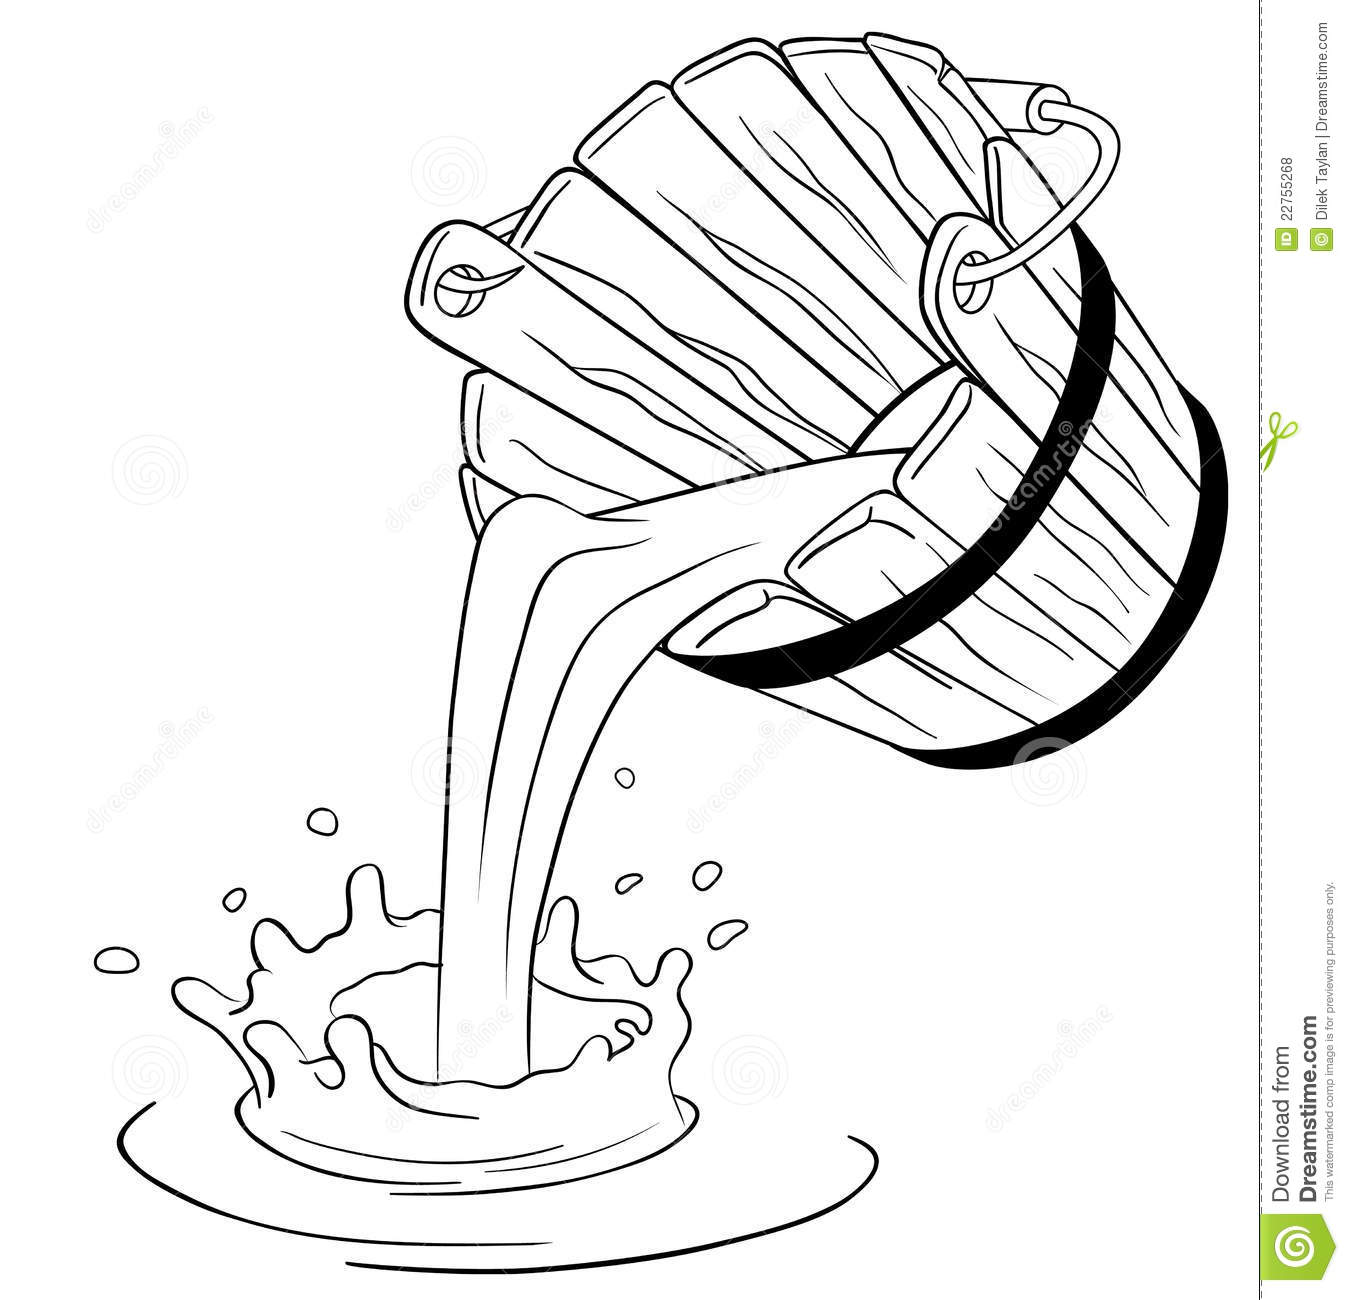 Pouring Milk From Bucket Royalty Free Stock Photos   Image  22755268